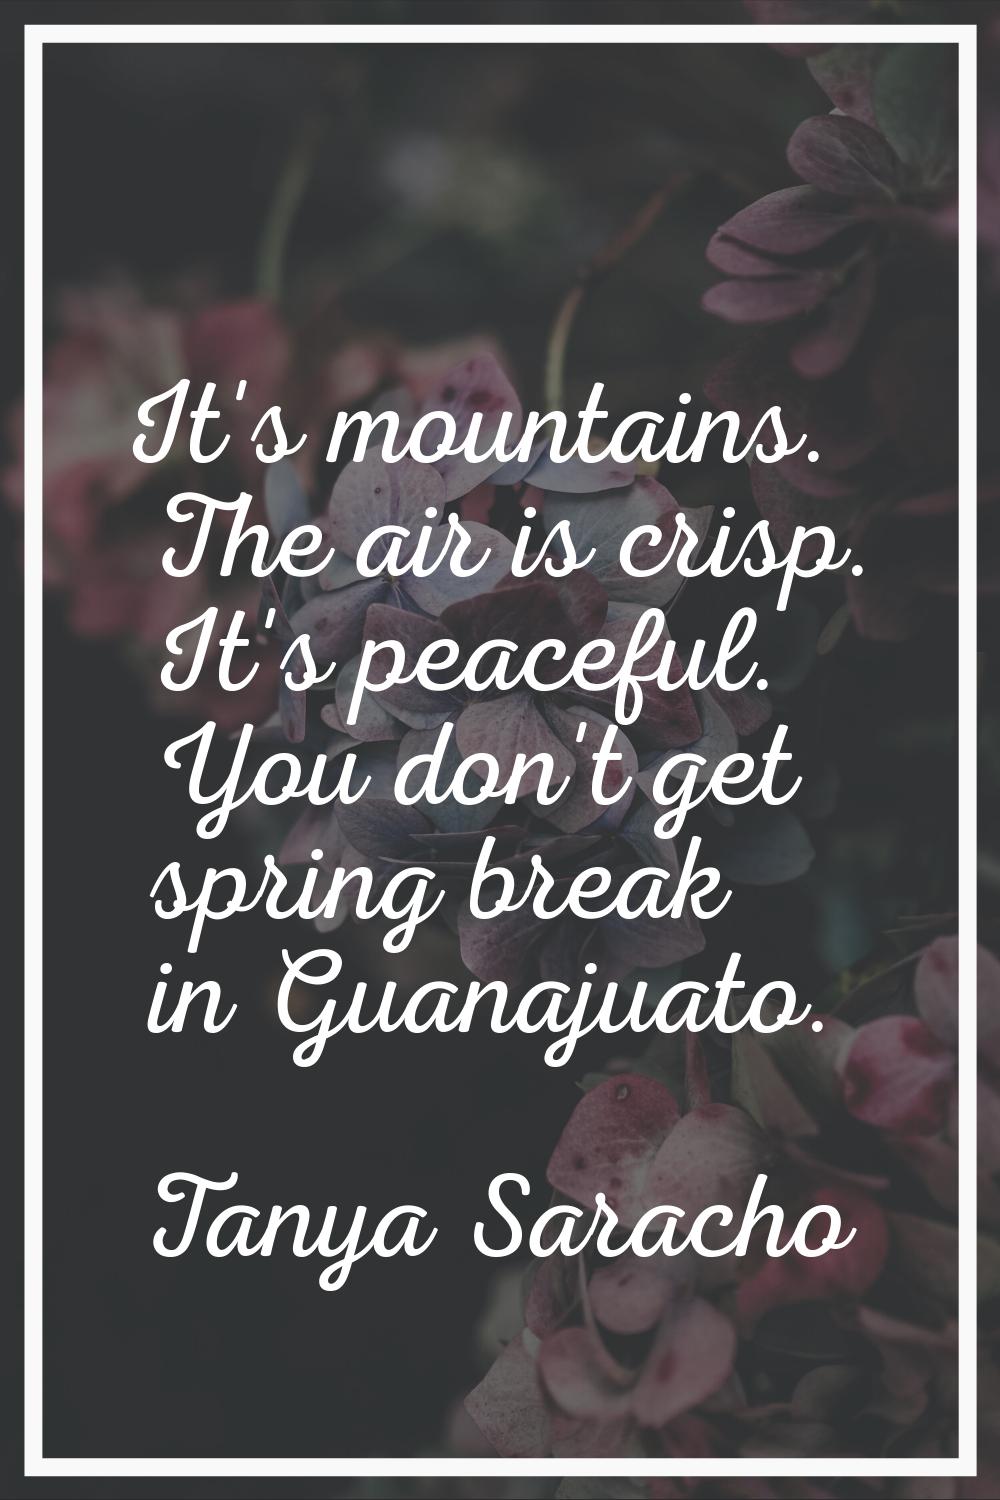 It's mountains. The air is crisp. It's peaceful. You don't get spring break in Guanajuato.